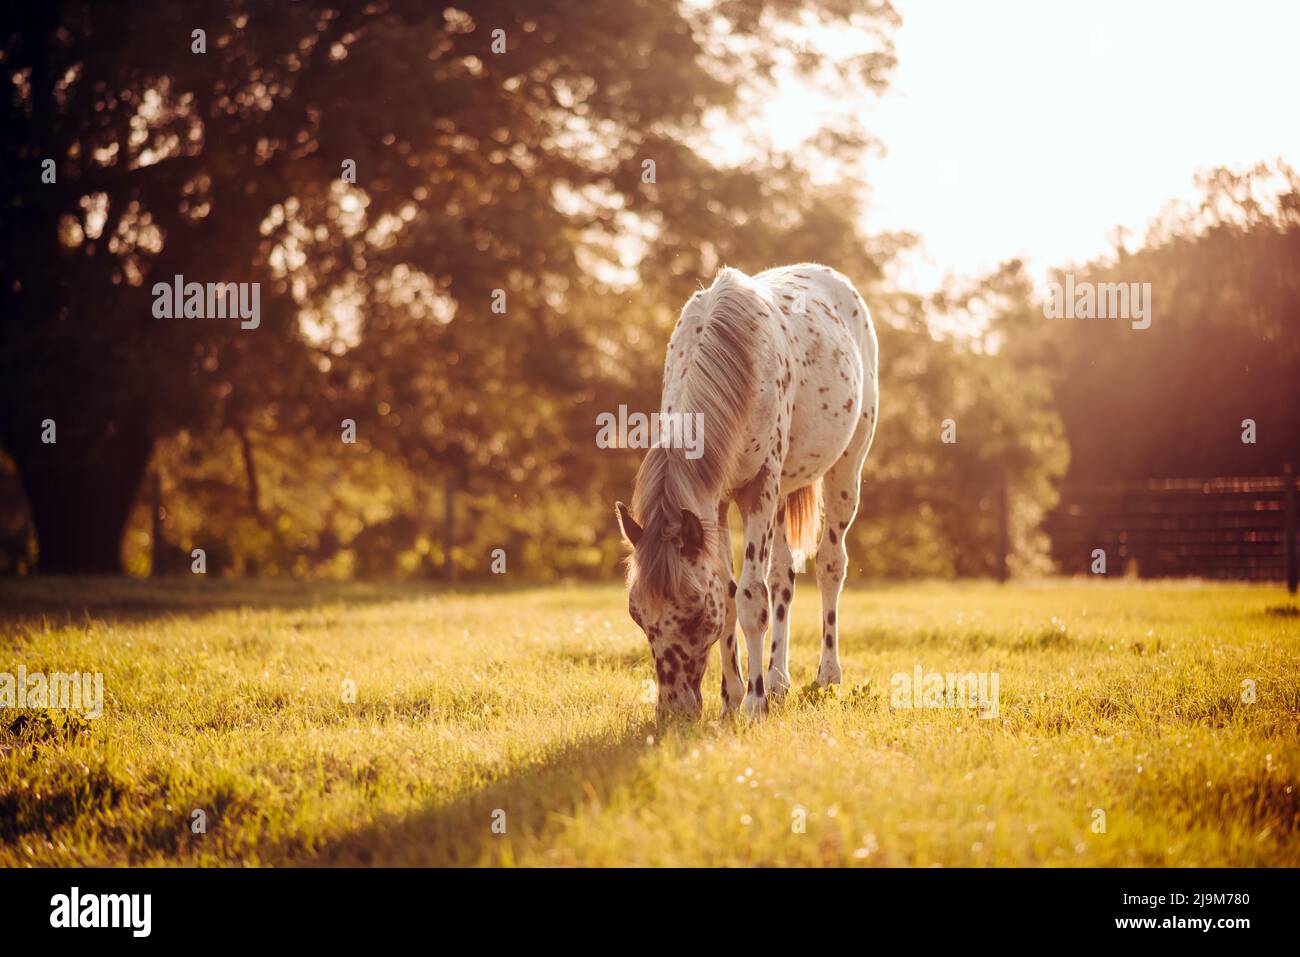 Appaloosa horse in the pasture at sunset, white horse with black and brown spots. yearling baby horse Stock Photo